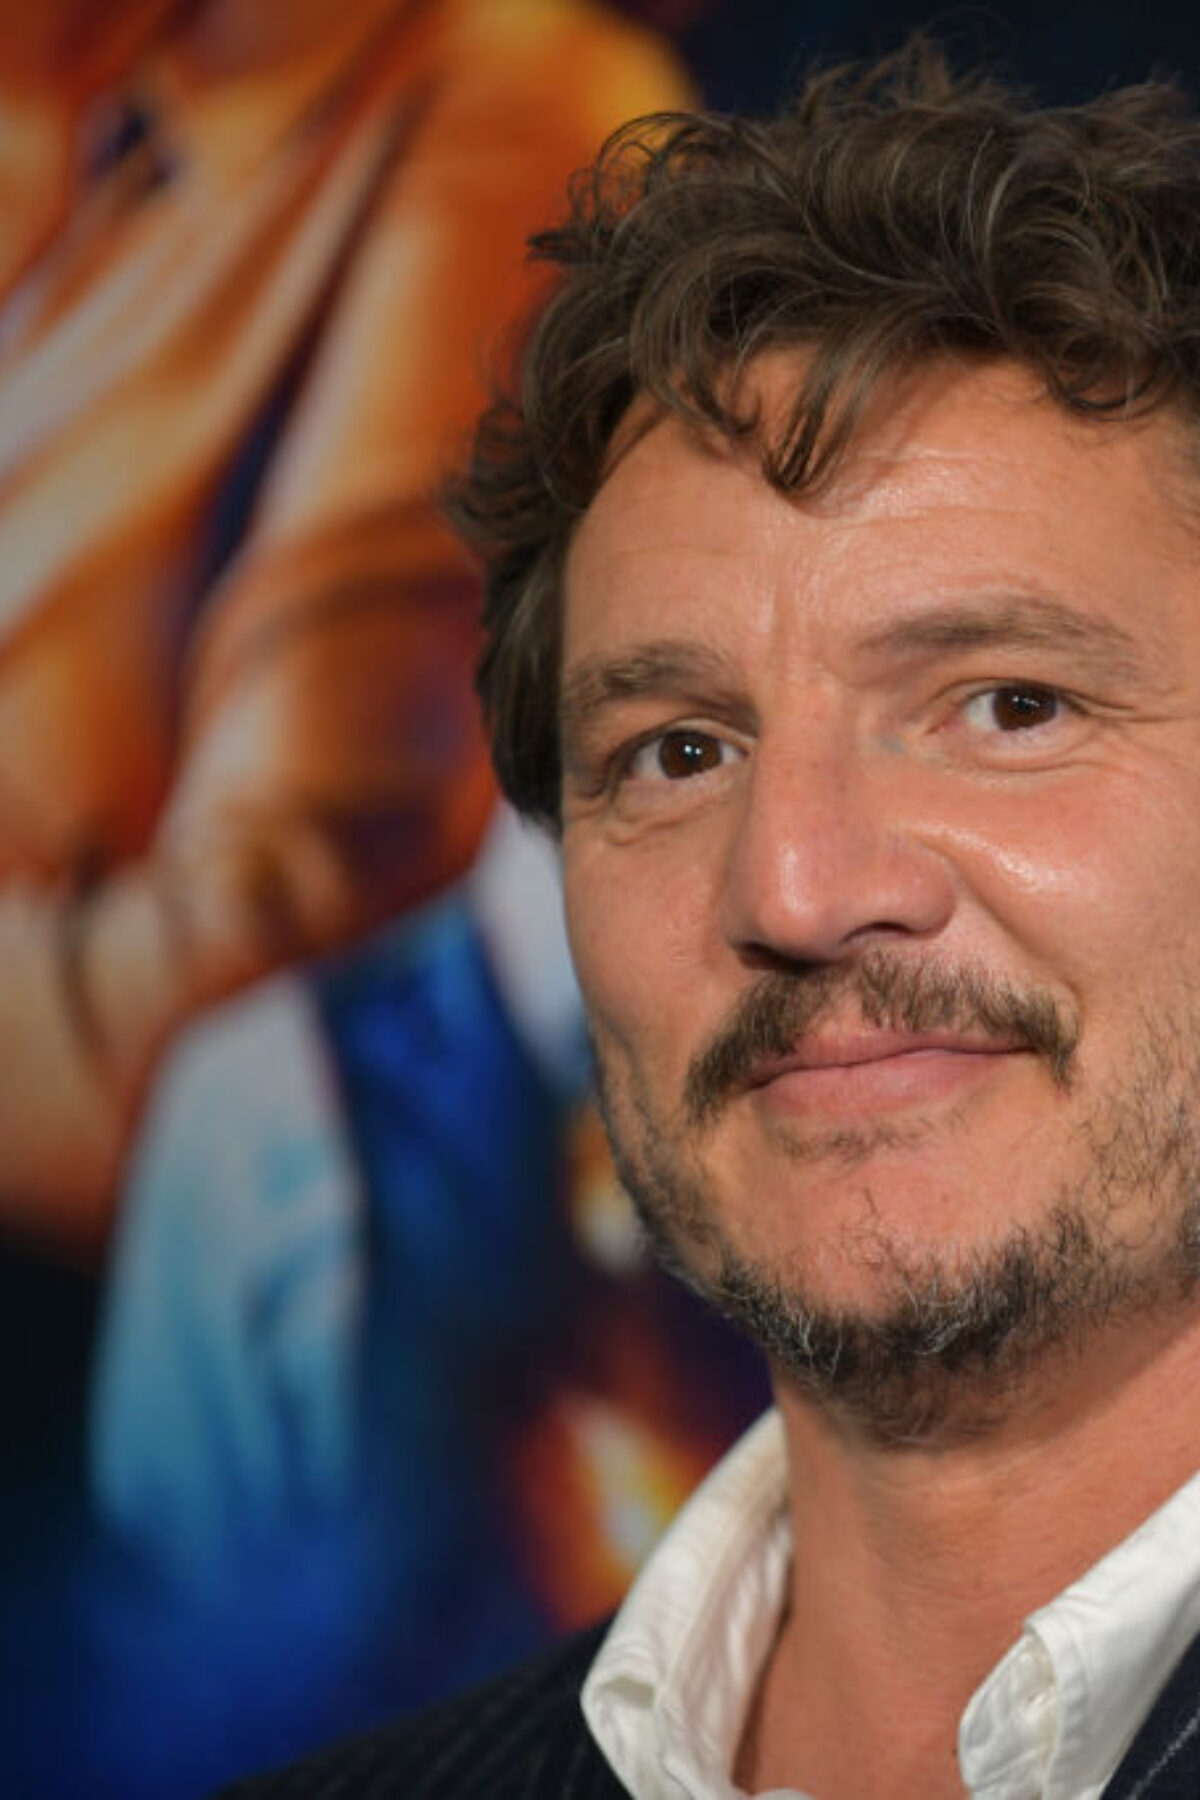 LOS ANGELES, CALIFORNIA - APRIL 18: Pedro Pascal attends the Los Angeles special screening of 